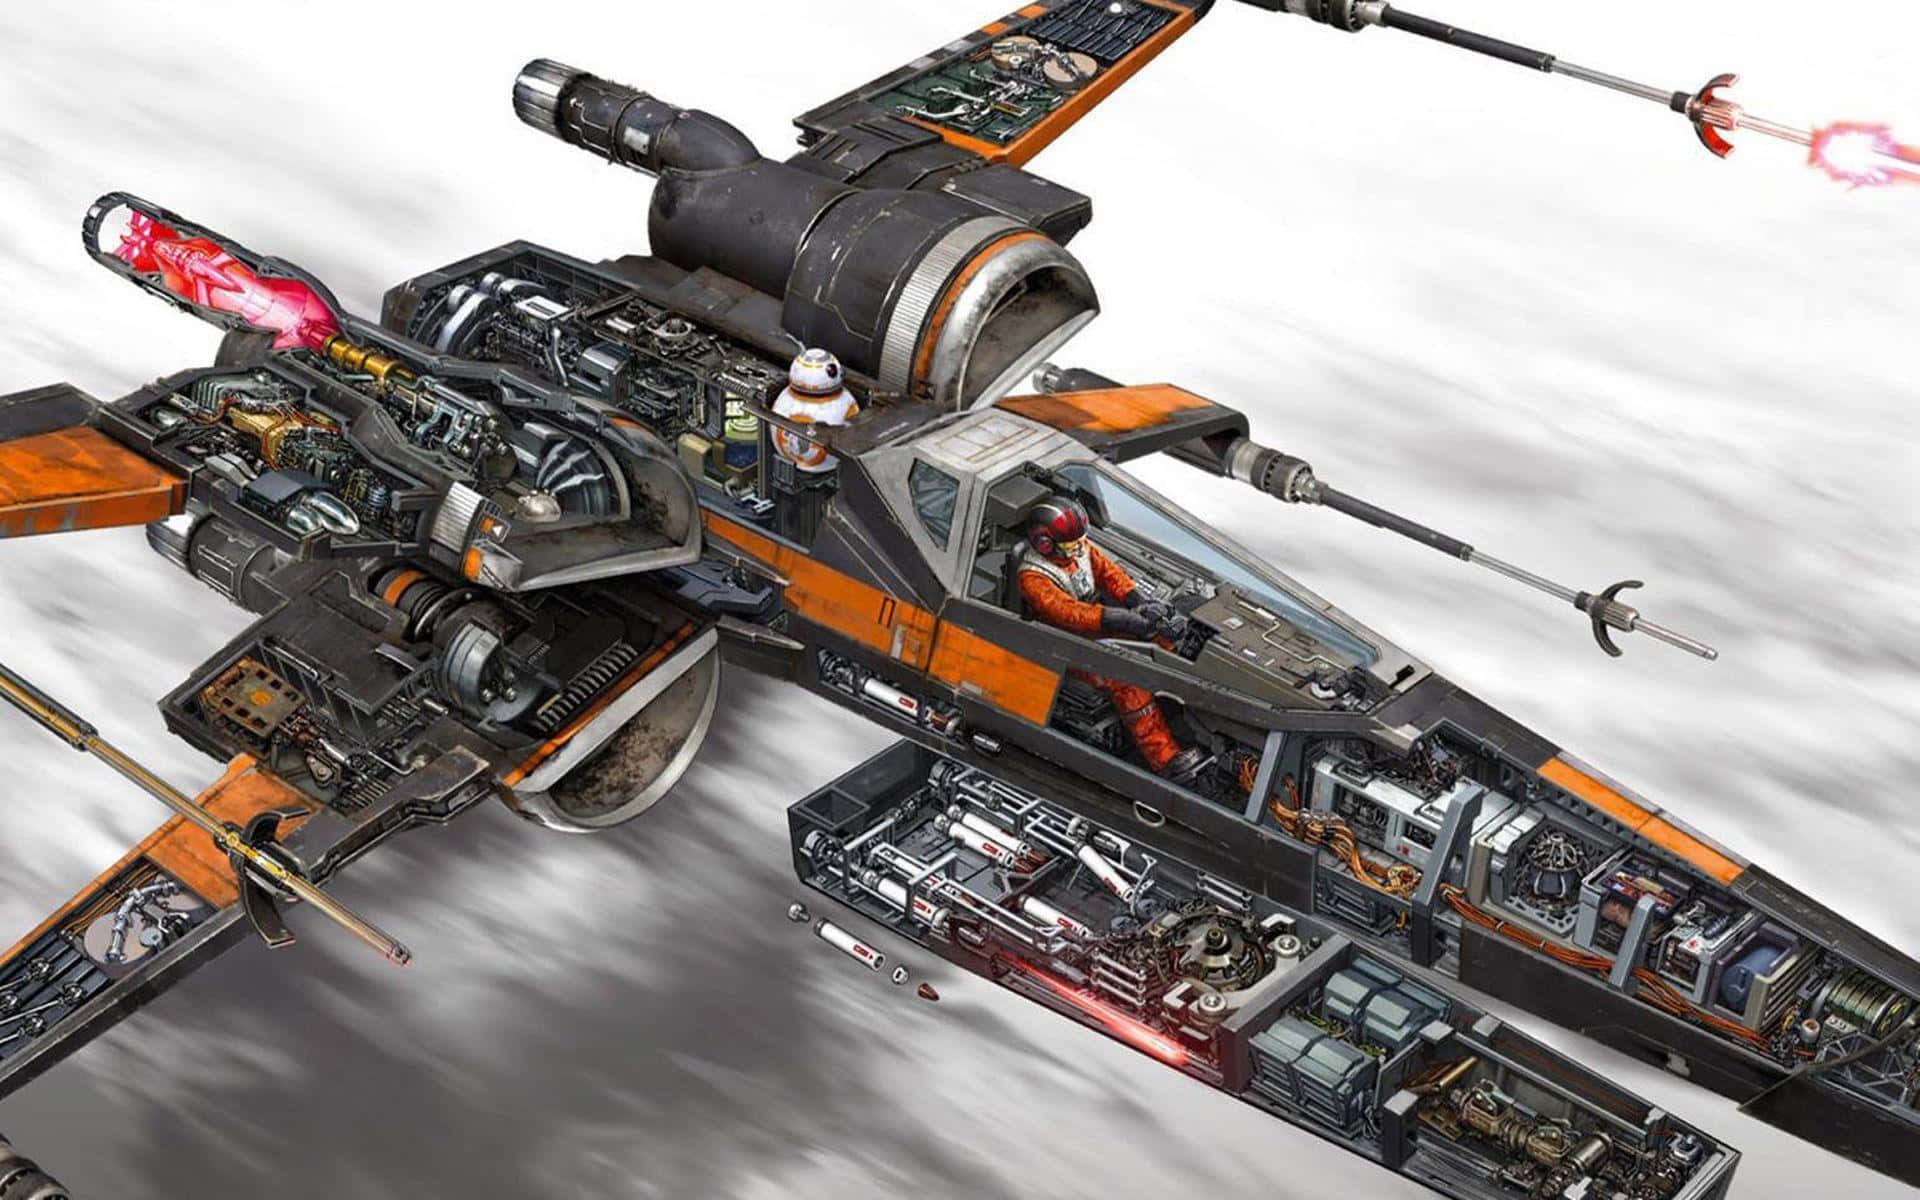 Fighting the forces of evil in the epic Star Wars X-Wing space battle. Wallpaper